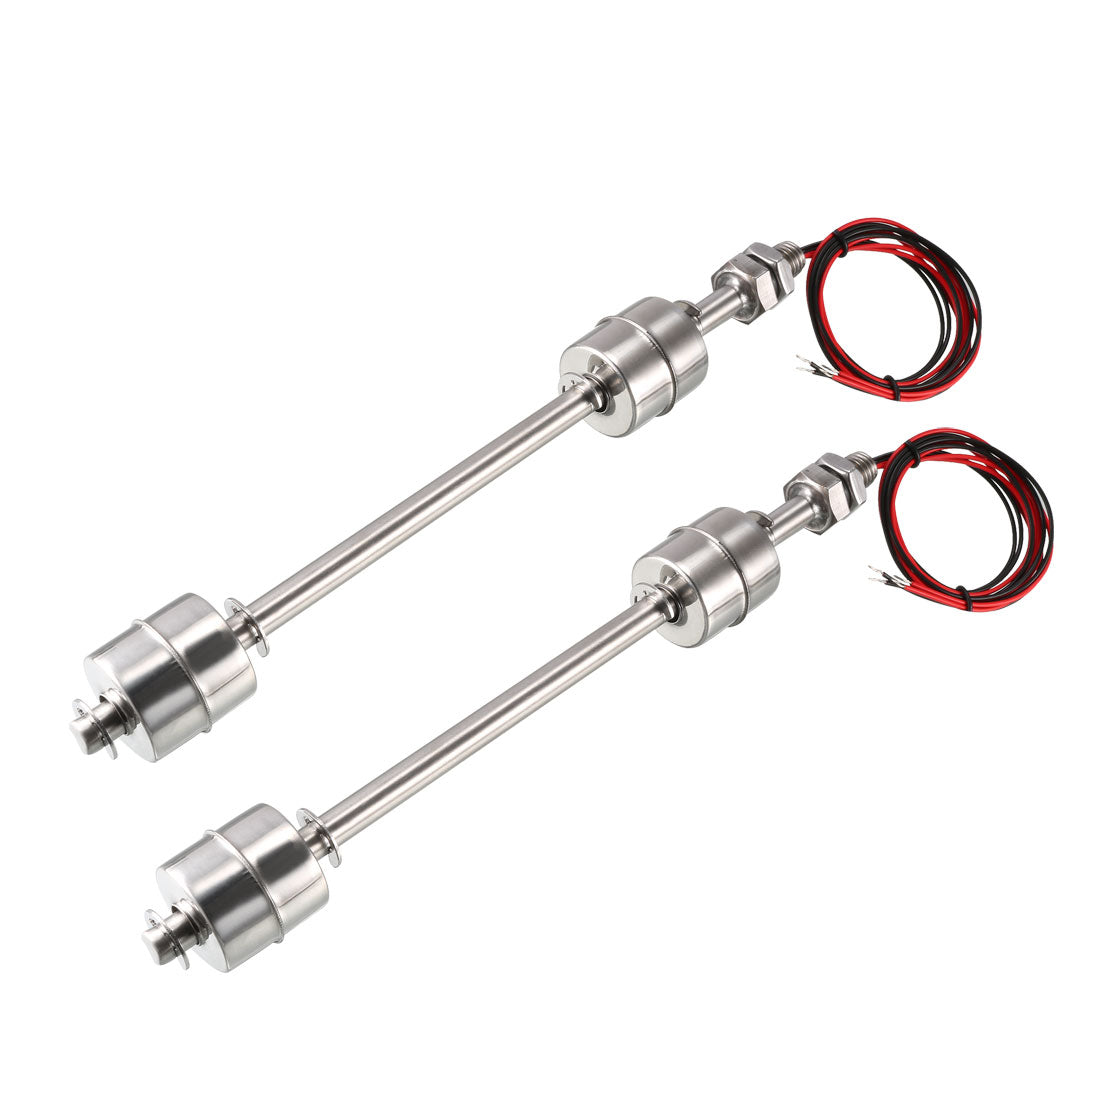 uxcell Uxcell 2PCS Stainless Steel Dual Ball Float Switch 220mm/8.66inch Tank Vertical Water Level Sensor